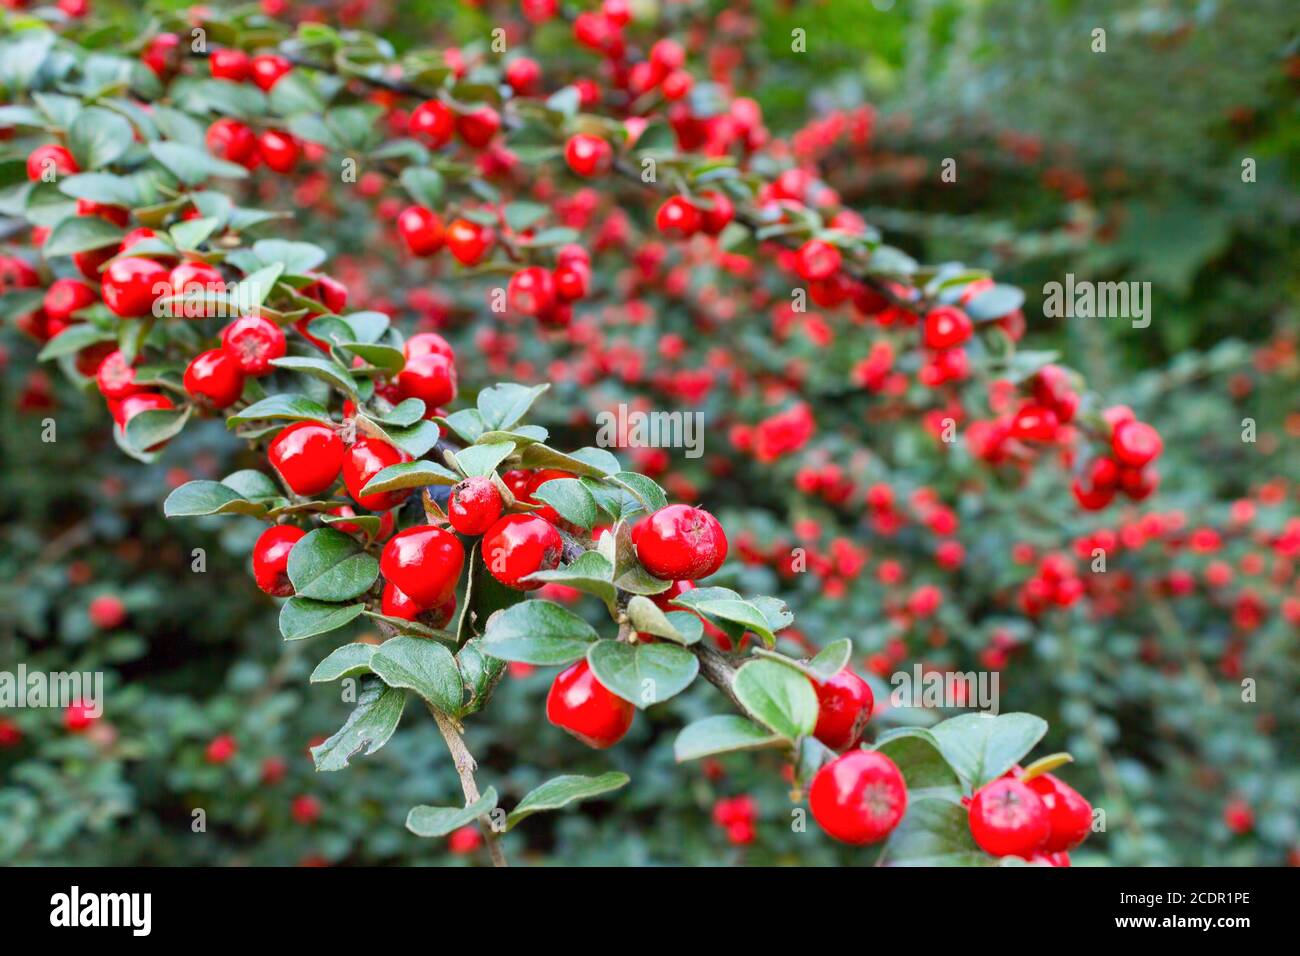 Branches with ripe red cotoneaster berries Stock Photo